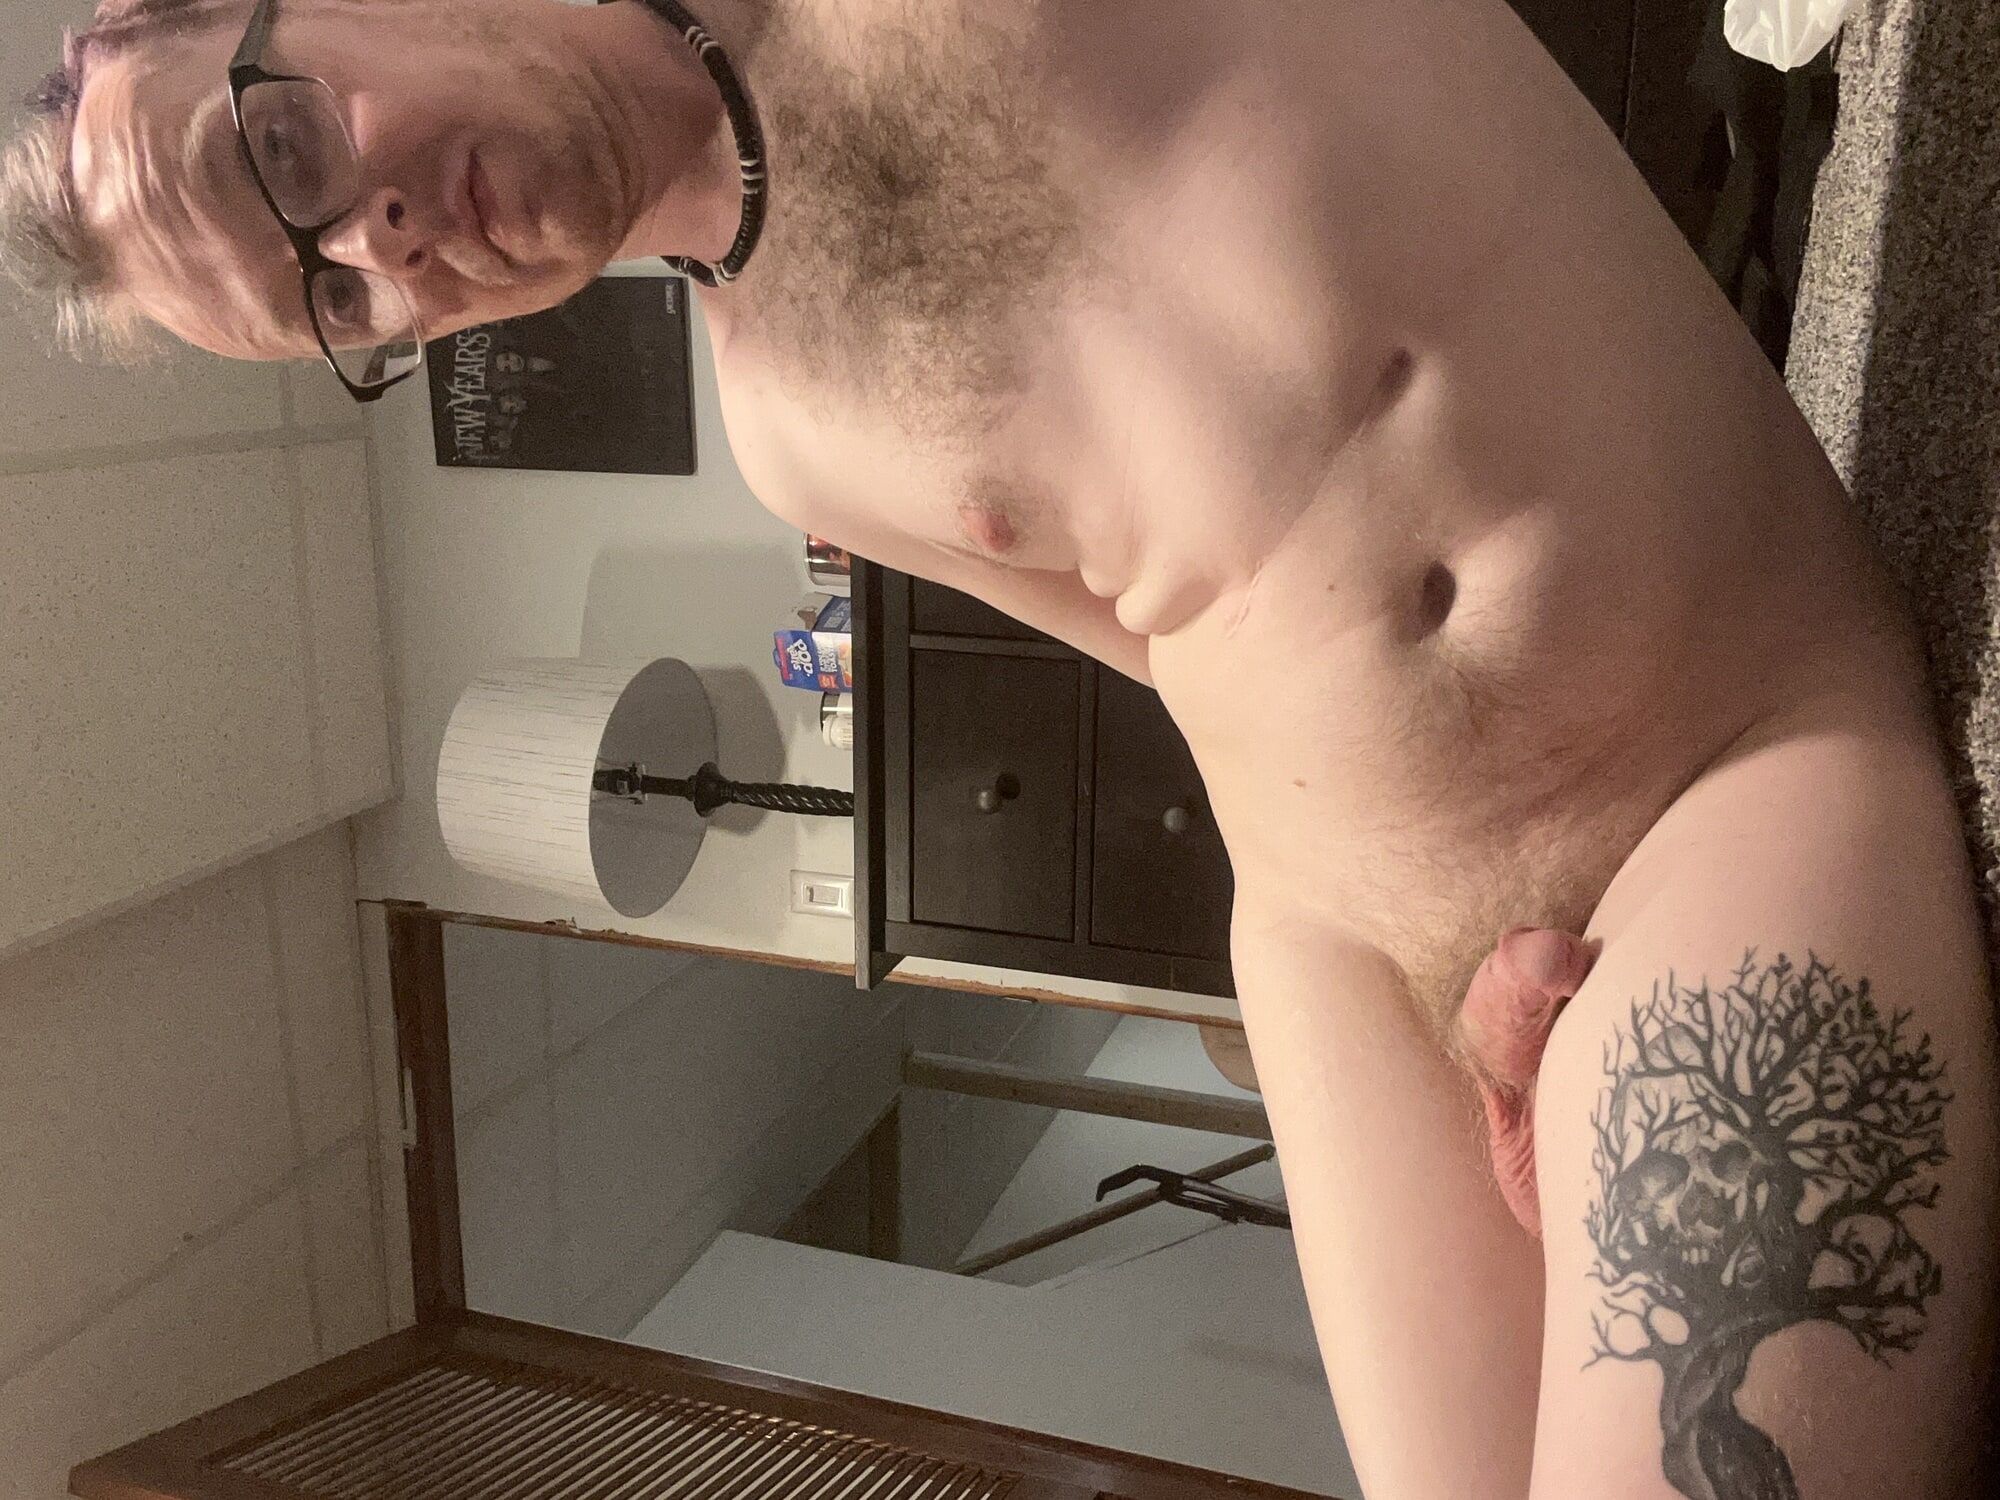 My dangling cock and balls, along with ass #6